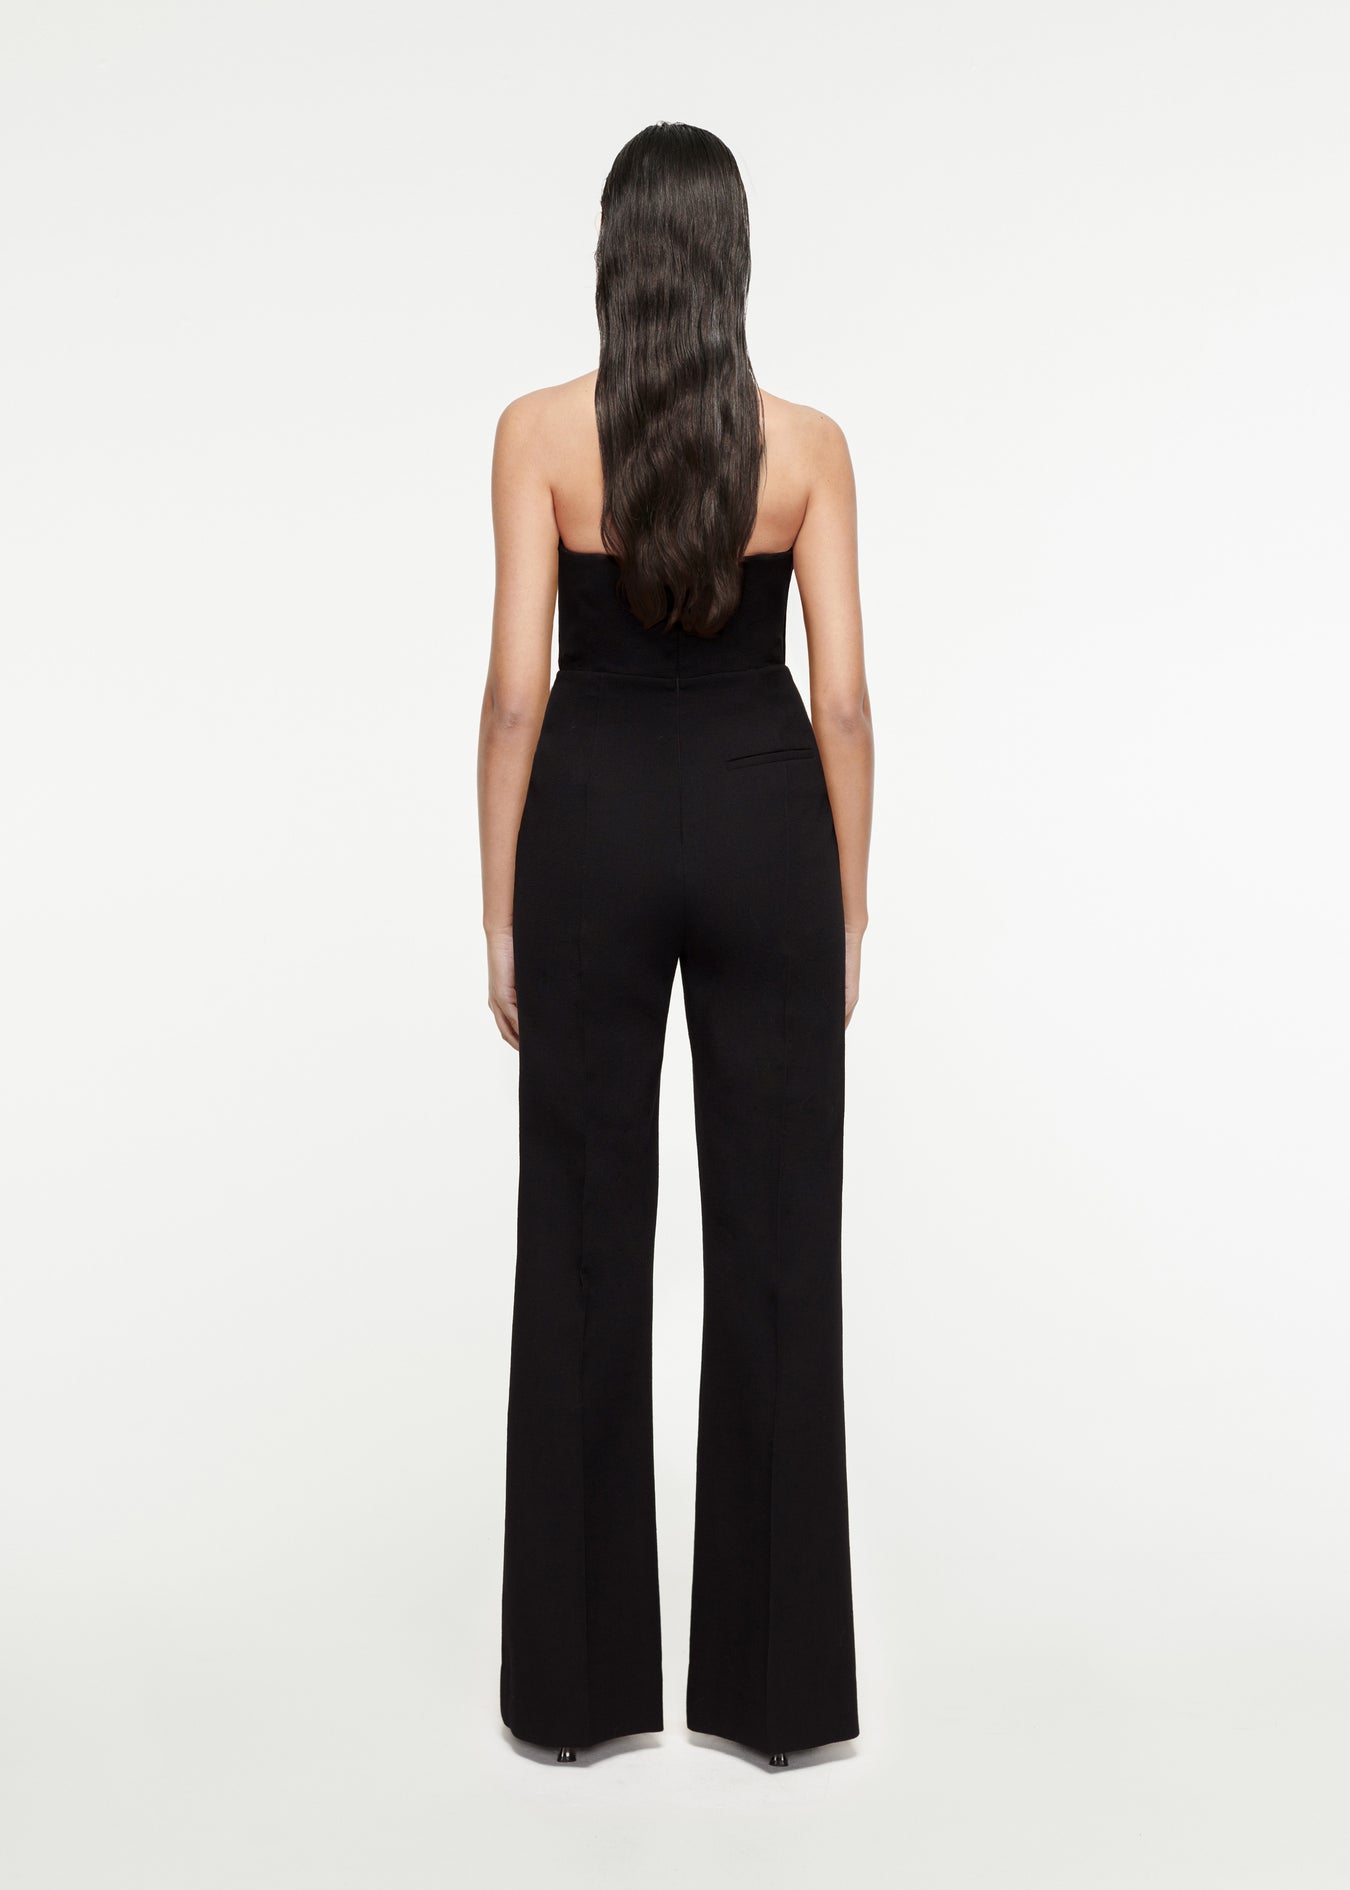 The back of a woman wearing the Asymmetric Wool Crepe Jumpsuit in Black